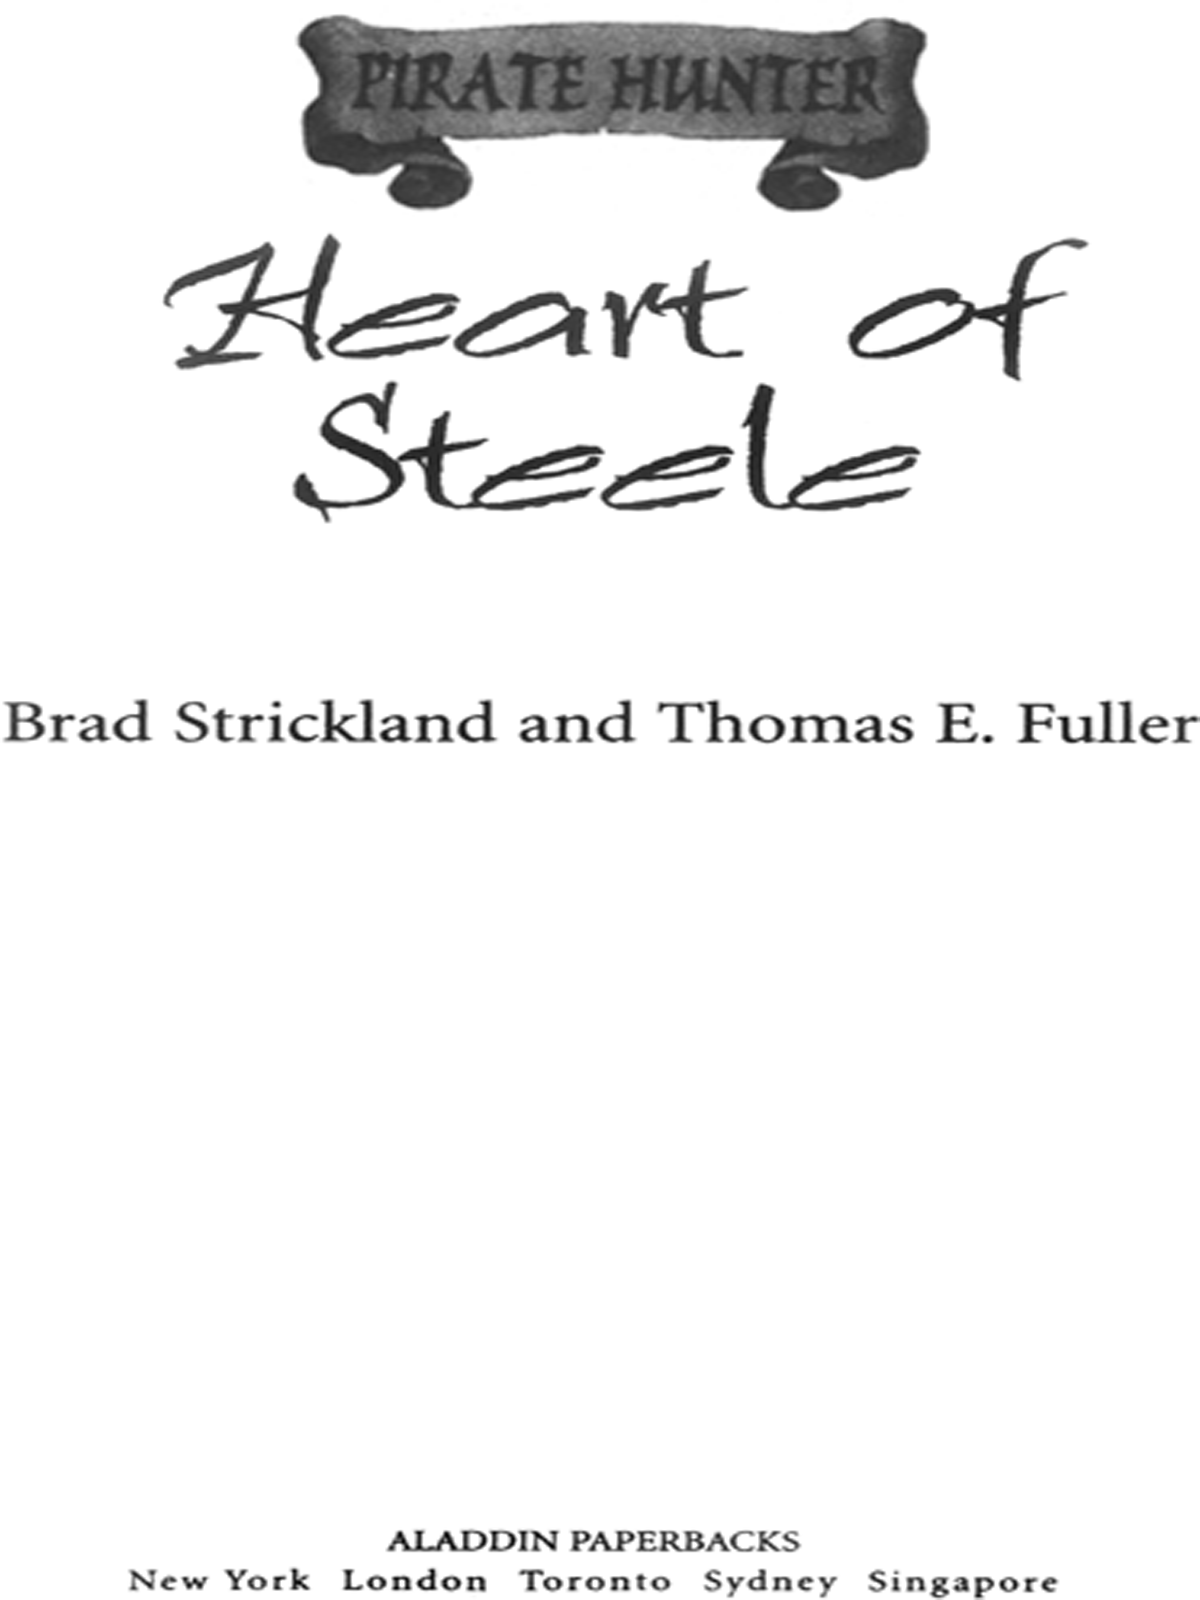 Heart of Steele (2003) by Brad Strickland